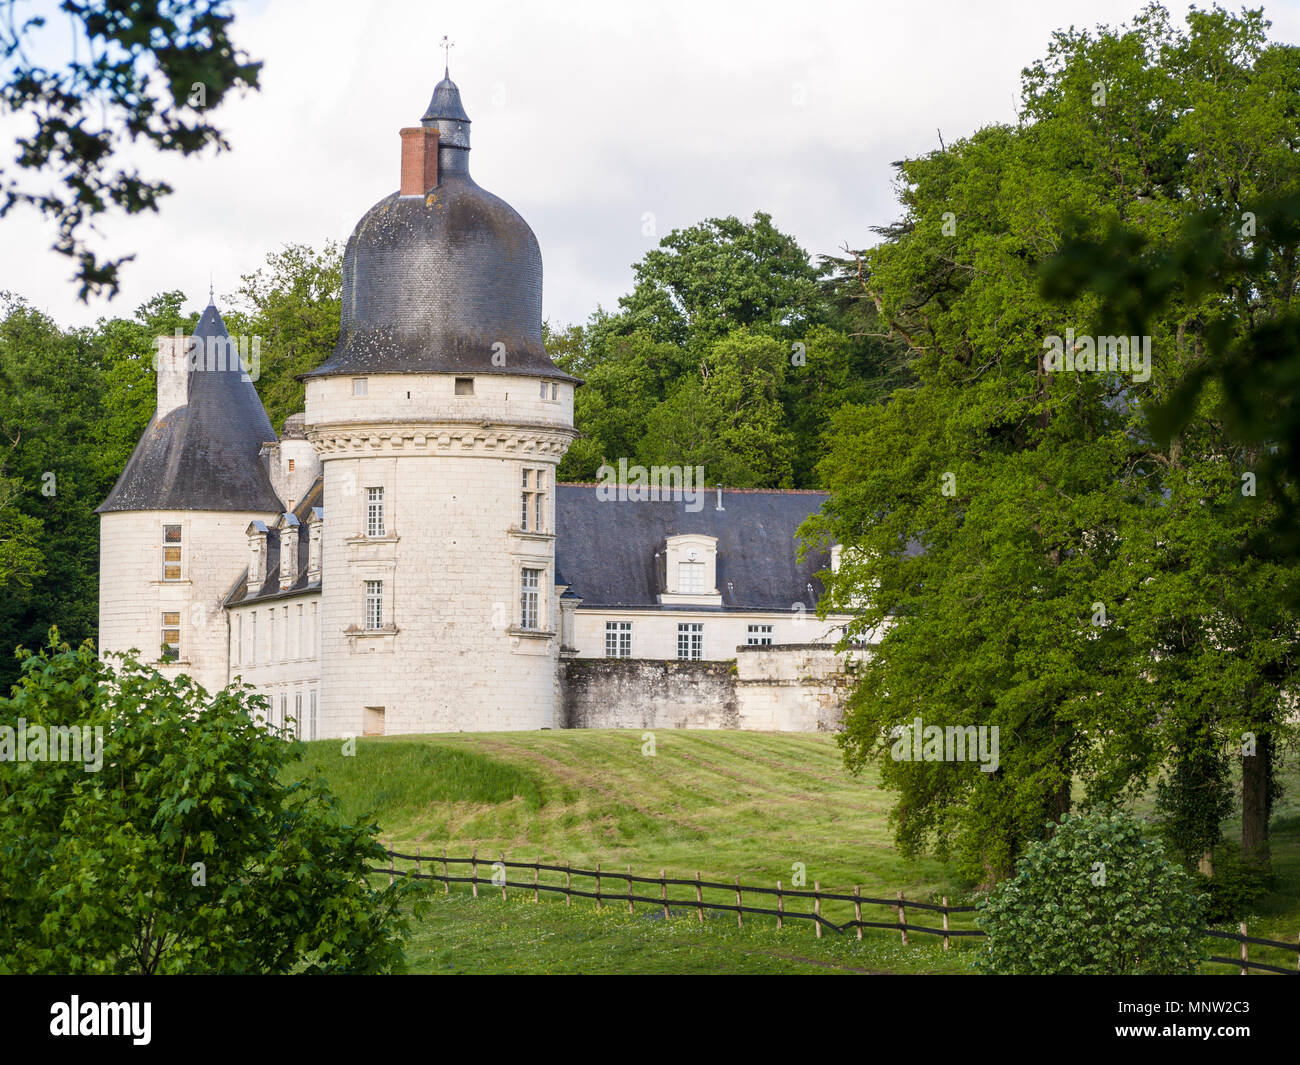 Exterior side view of Chateau du Gue-Pean: This well kept Chateau in the Loire region of France is surrounded by a thriving horse farm. Stock Photo